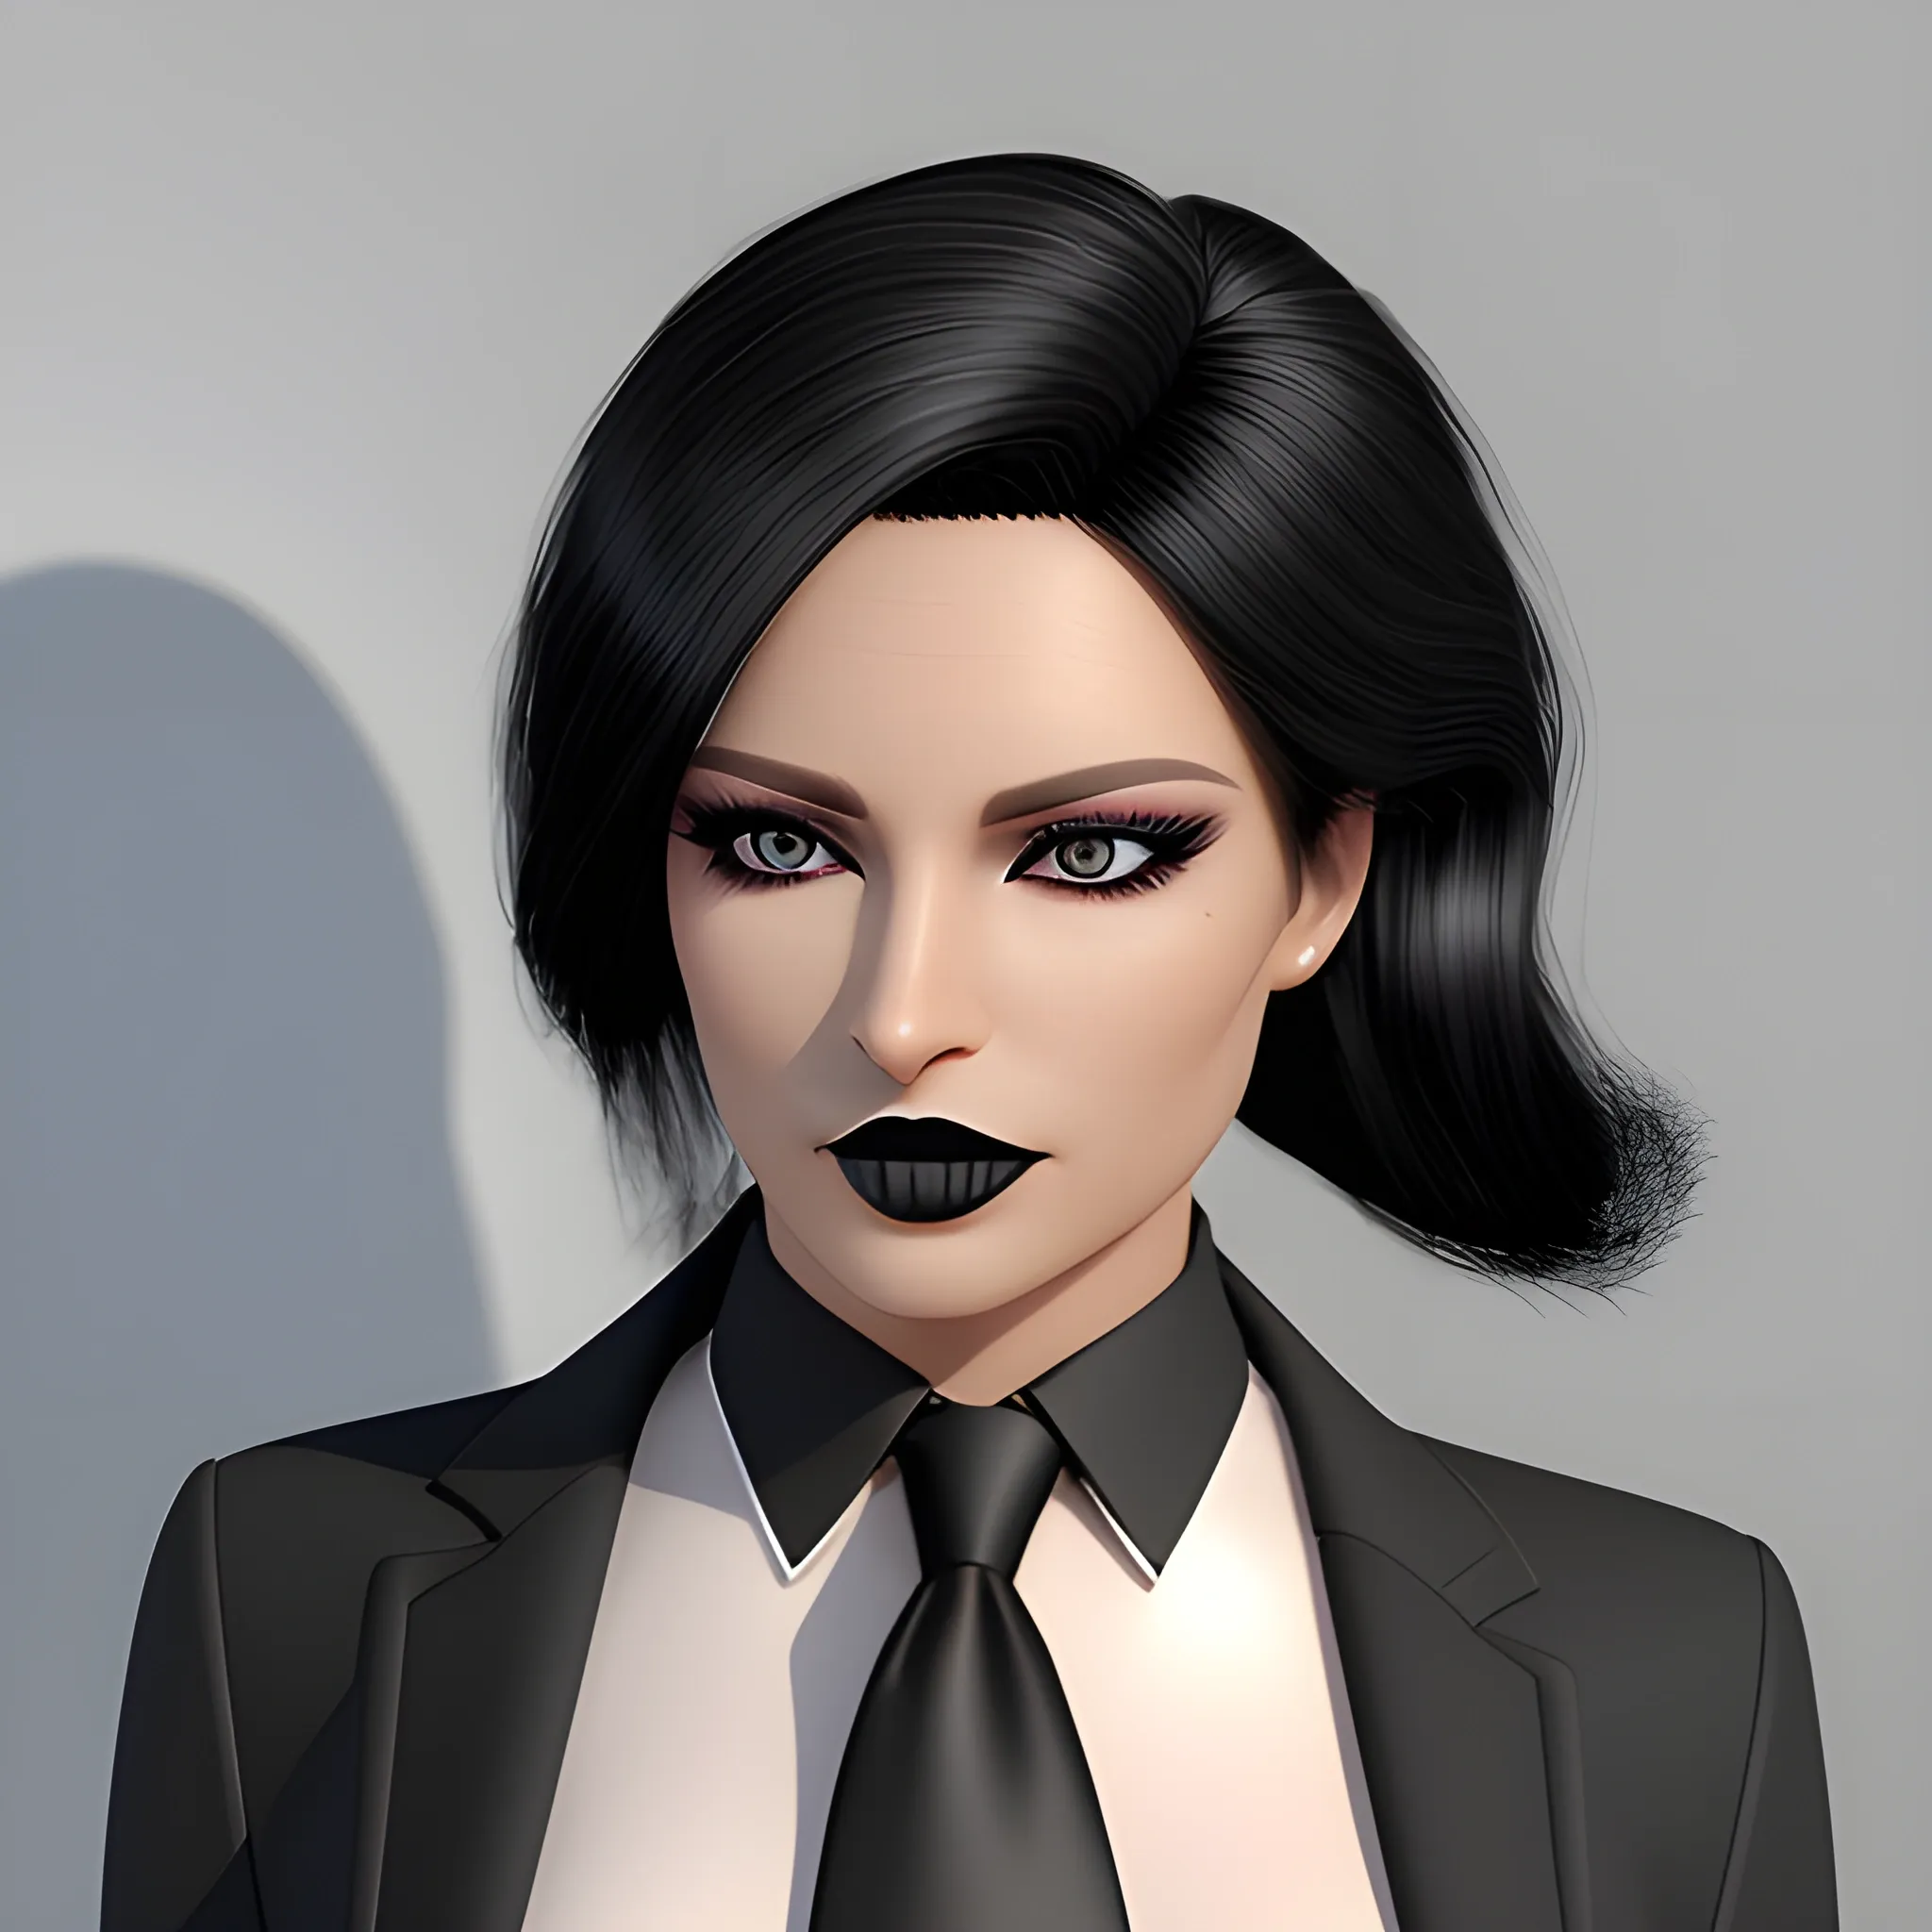 Beautiful black shoulder length haired business woman with black lipstick and eye makeup dressed in a an all black business suit black dress shirt black long tie photo realistic 24k ultra realistic quality 3D no deformation